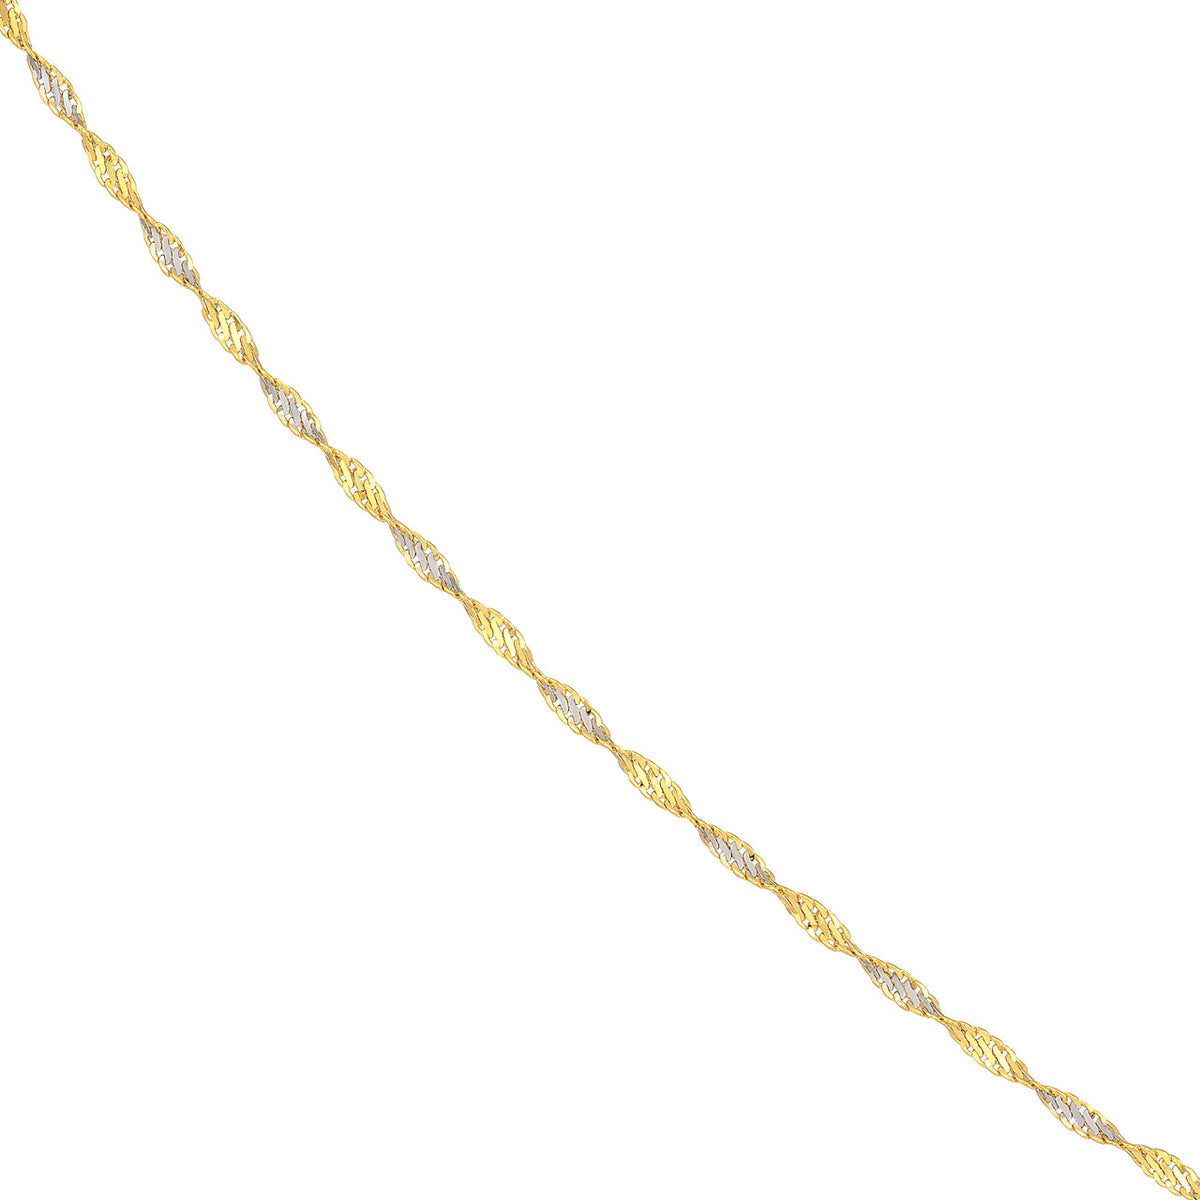 14K 1.35mm Yellow/White Dorica Chain Necklace with Lobster Lock